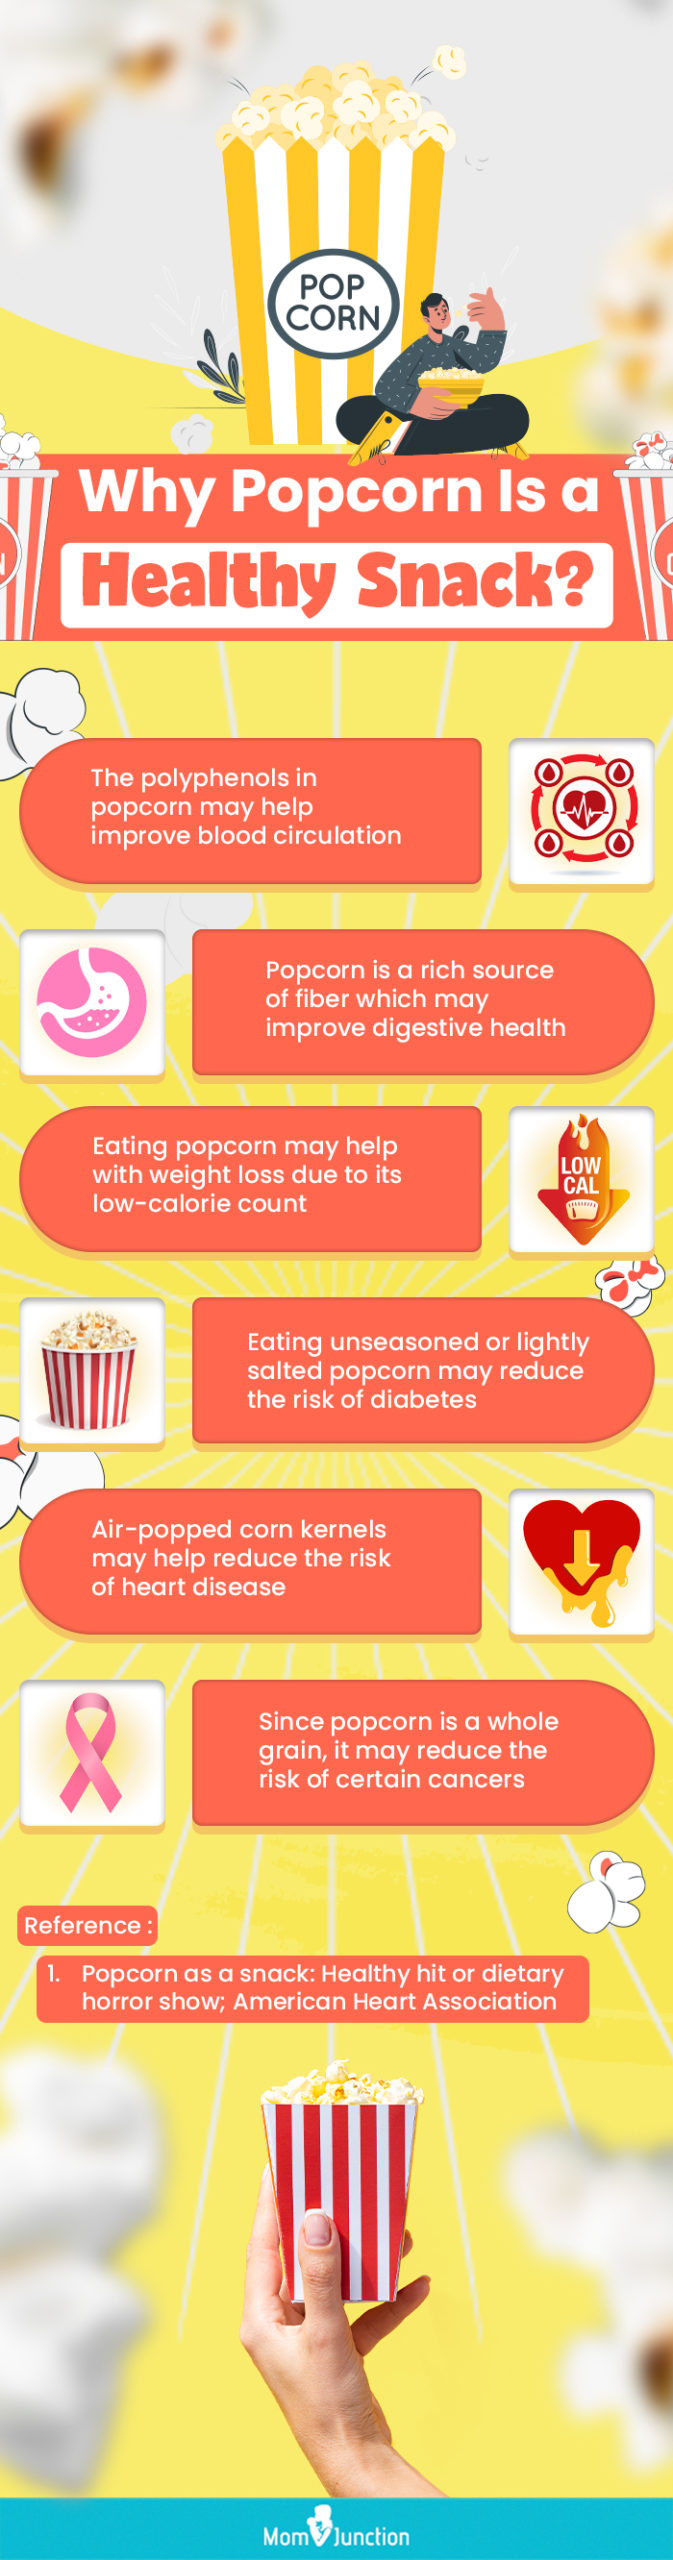 Why Popcorn Is A Healthy Snack (infographic)